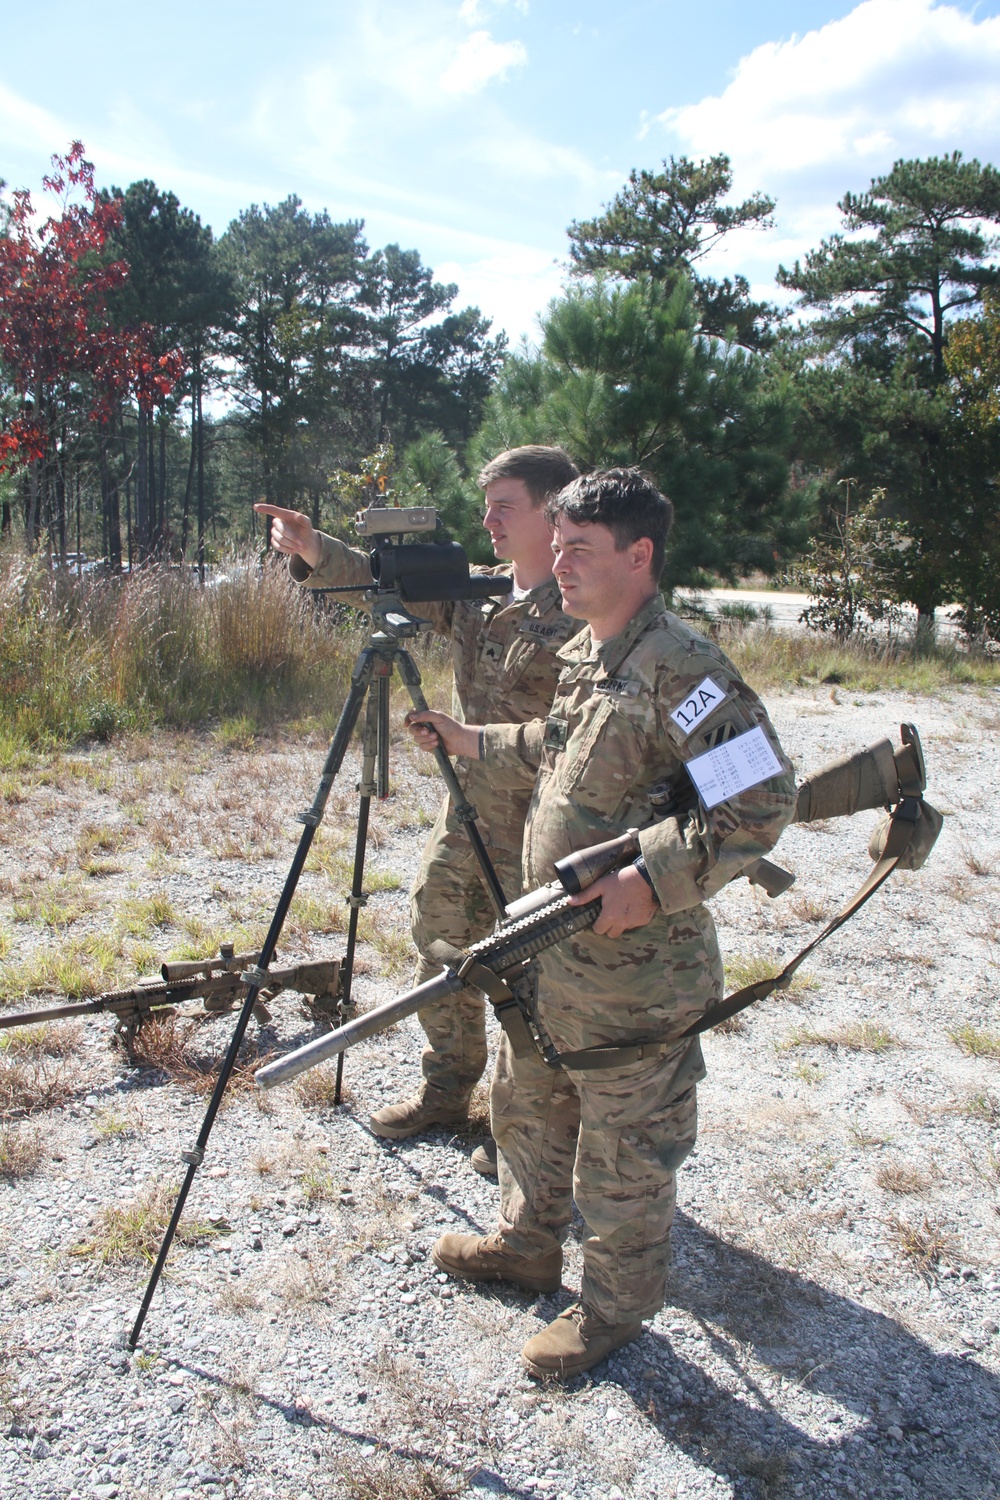 A view inside the 2015 International Sniper Competition